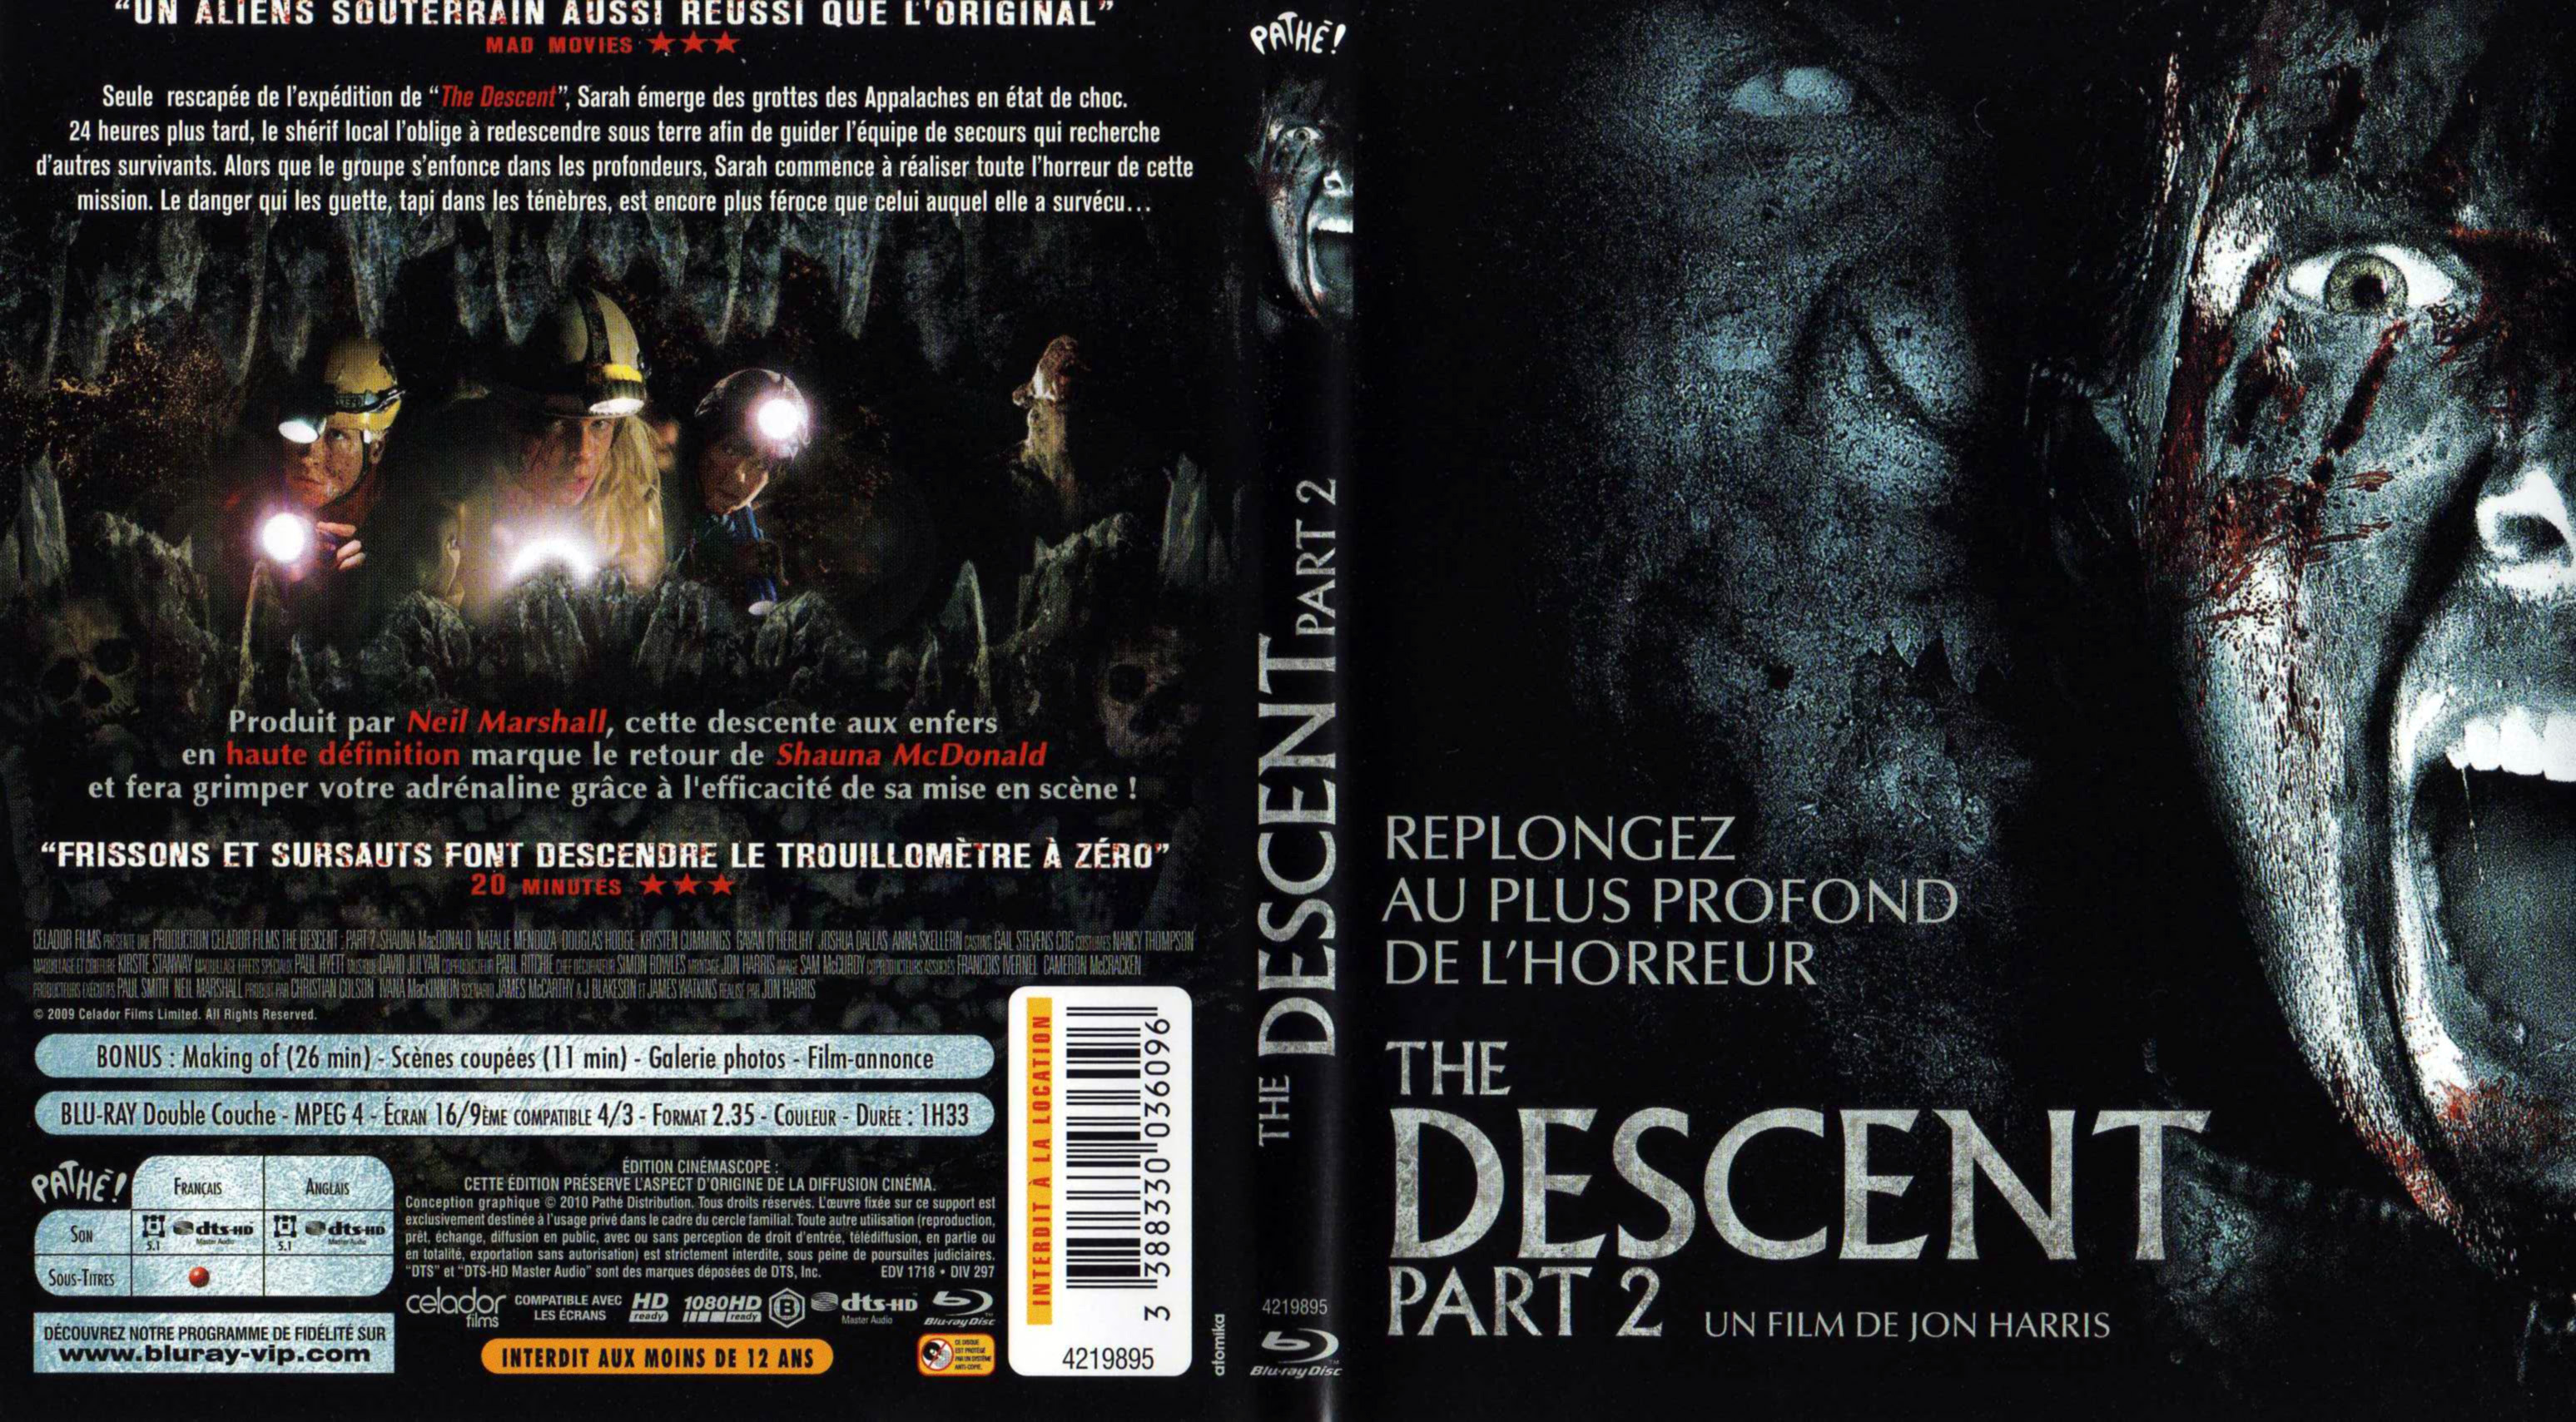 Jaquette DVD The descent part 2 (BLU-RAY)